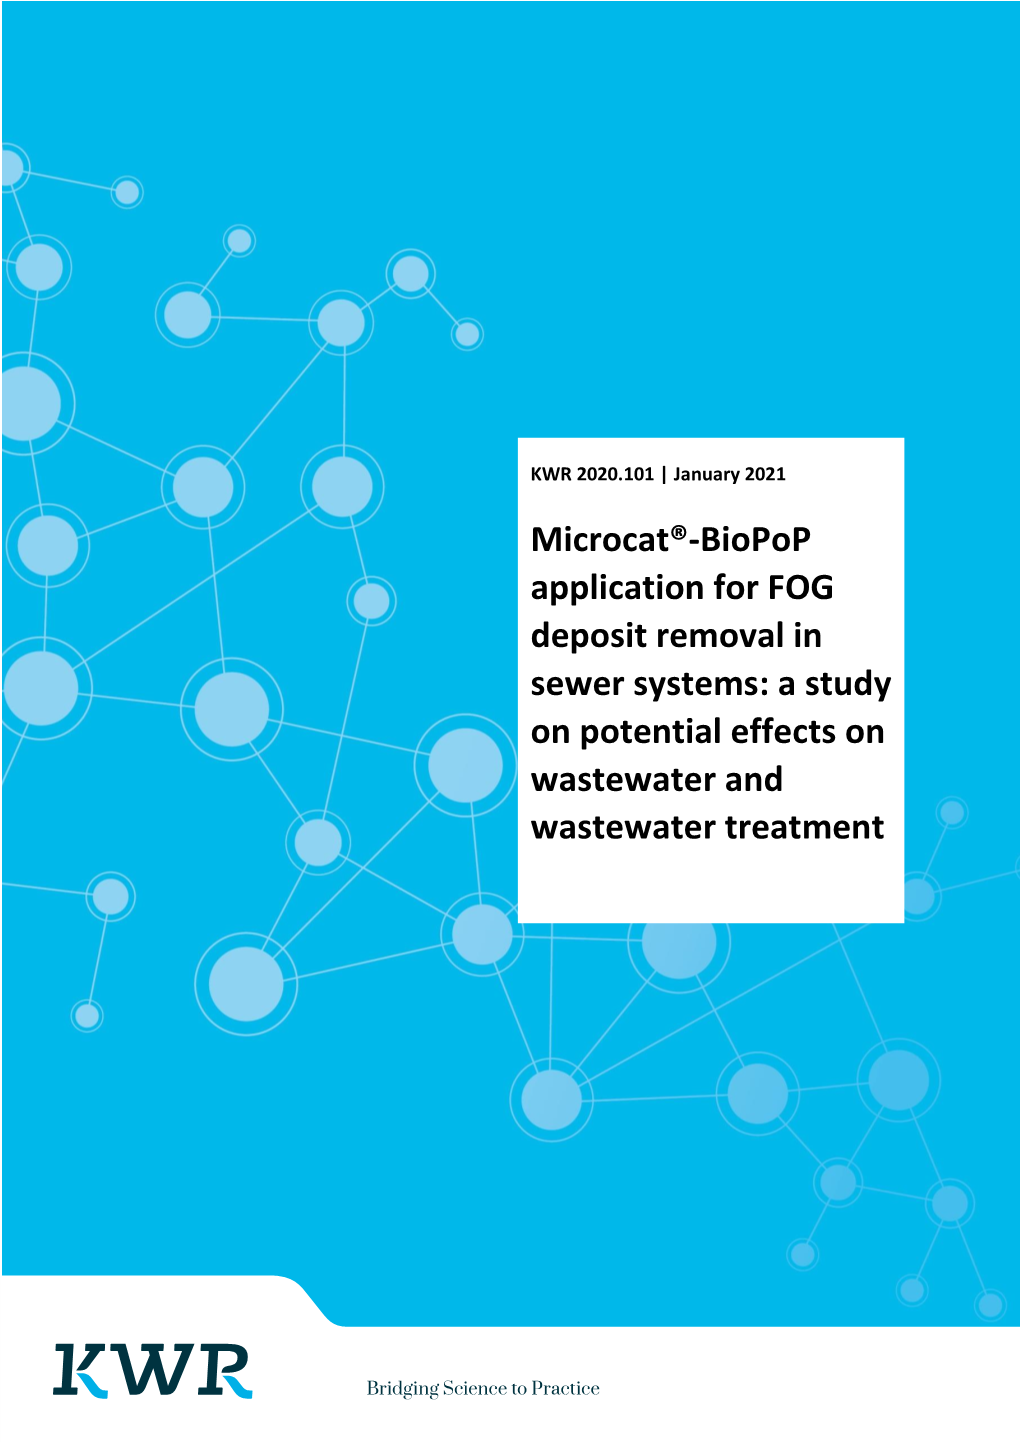 Microcat® -Biopop Application for FOG Deposit Removal in Sewer Systems: a Study on Potential Effects on Wastewater and Wastewater Treatment